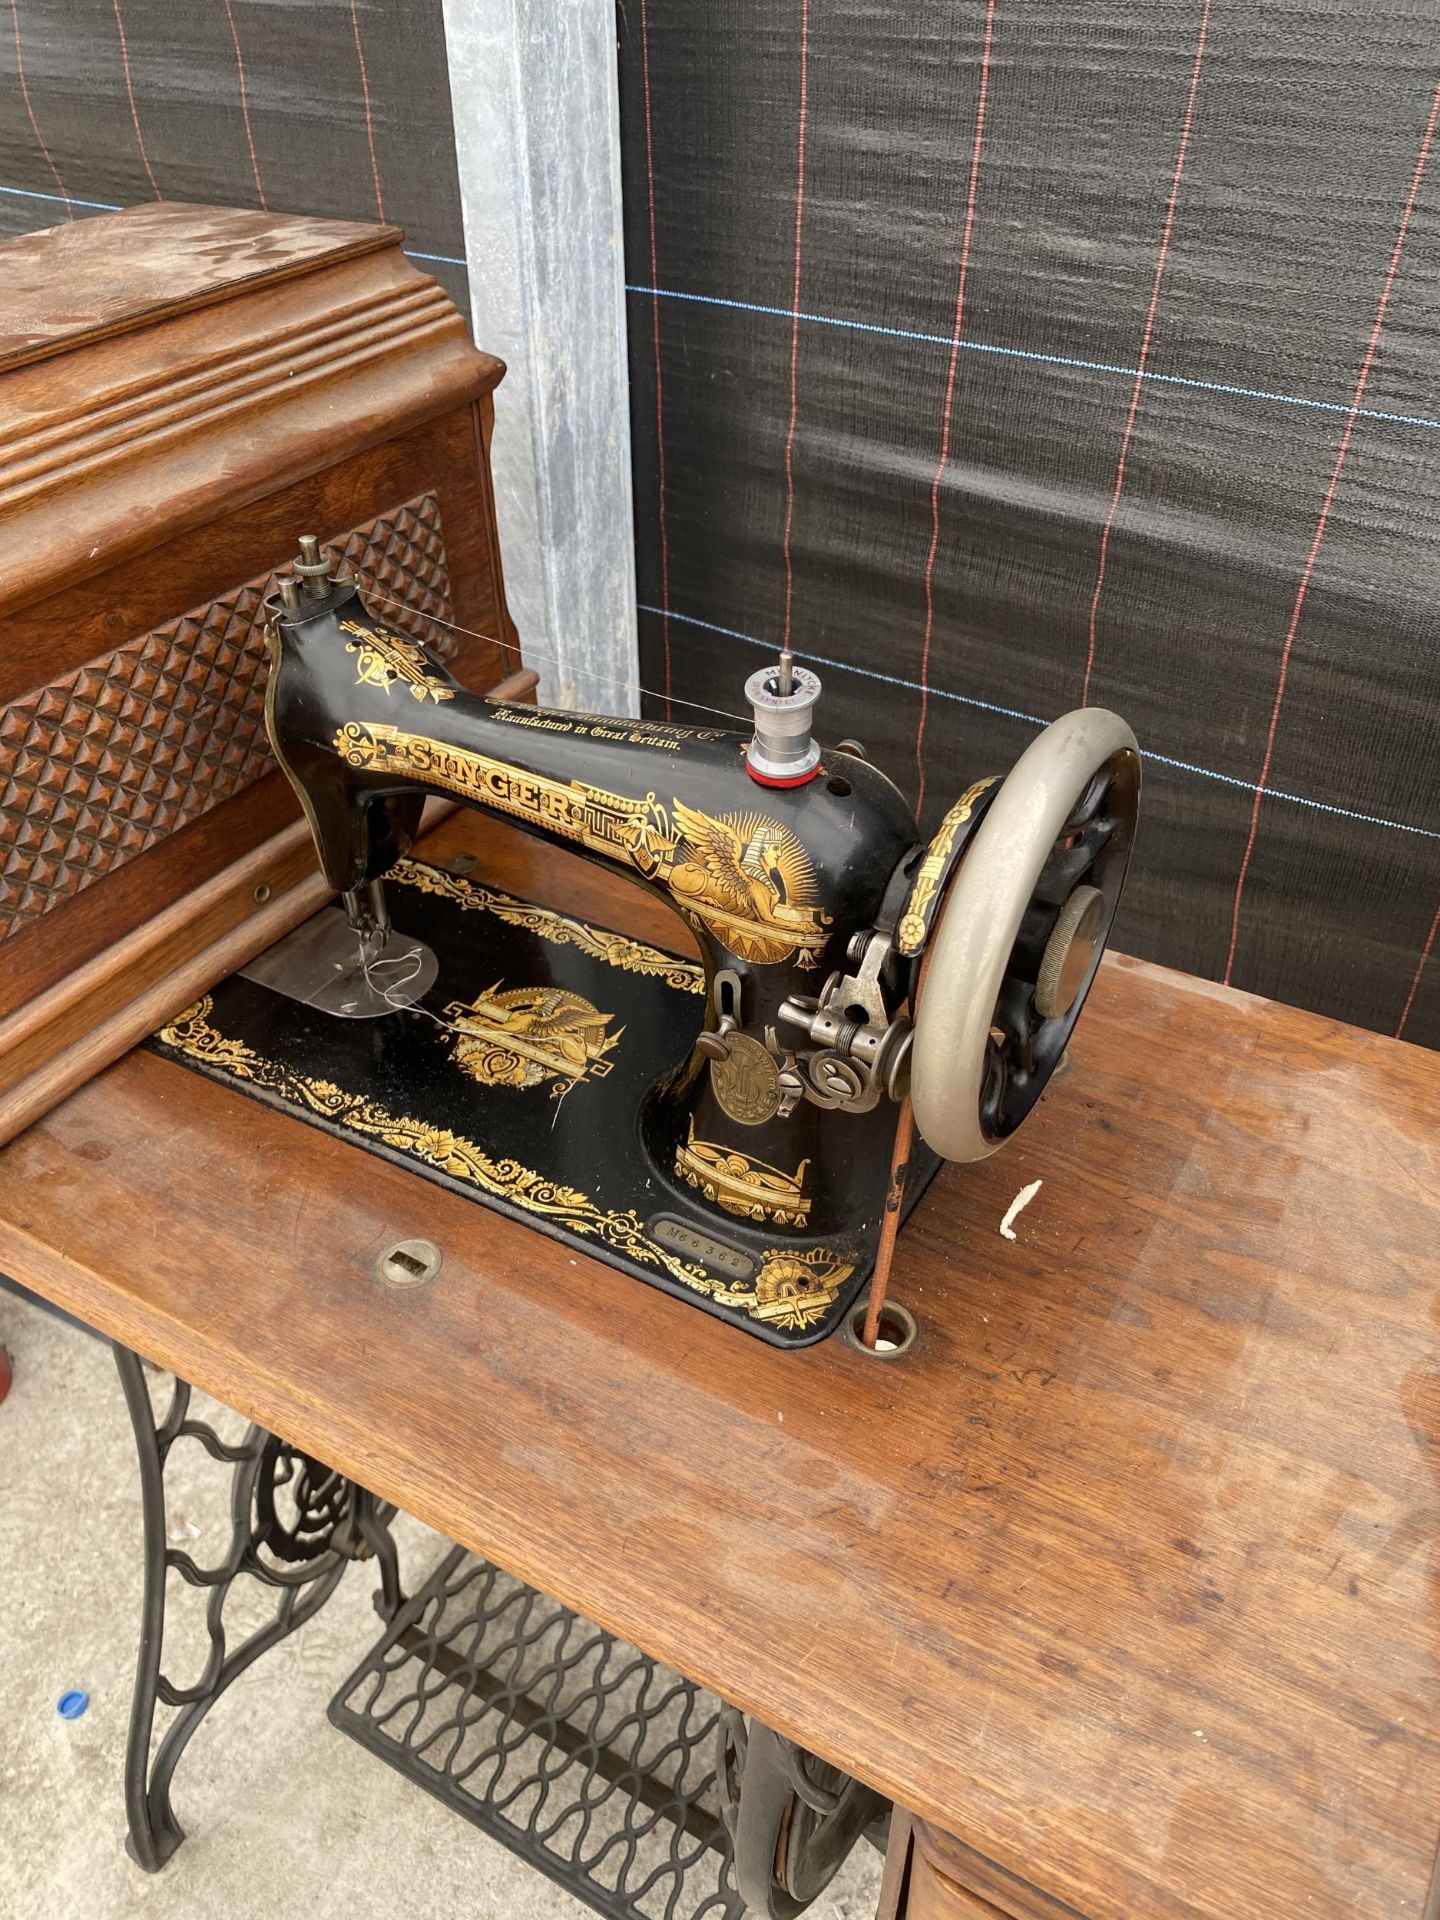 A SINGER TREADLE SEWING MACHINE WITH SEWING CONTENTS TO DRAWERS - Image 3 of 6